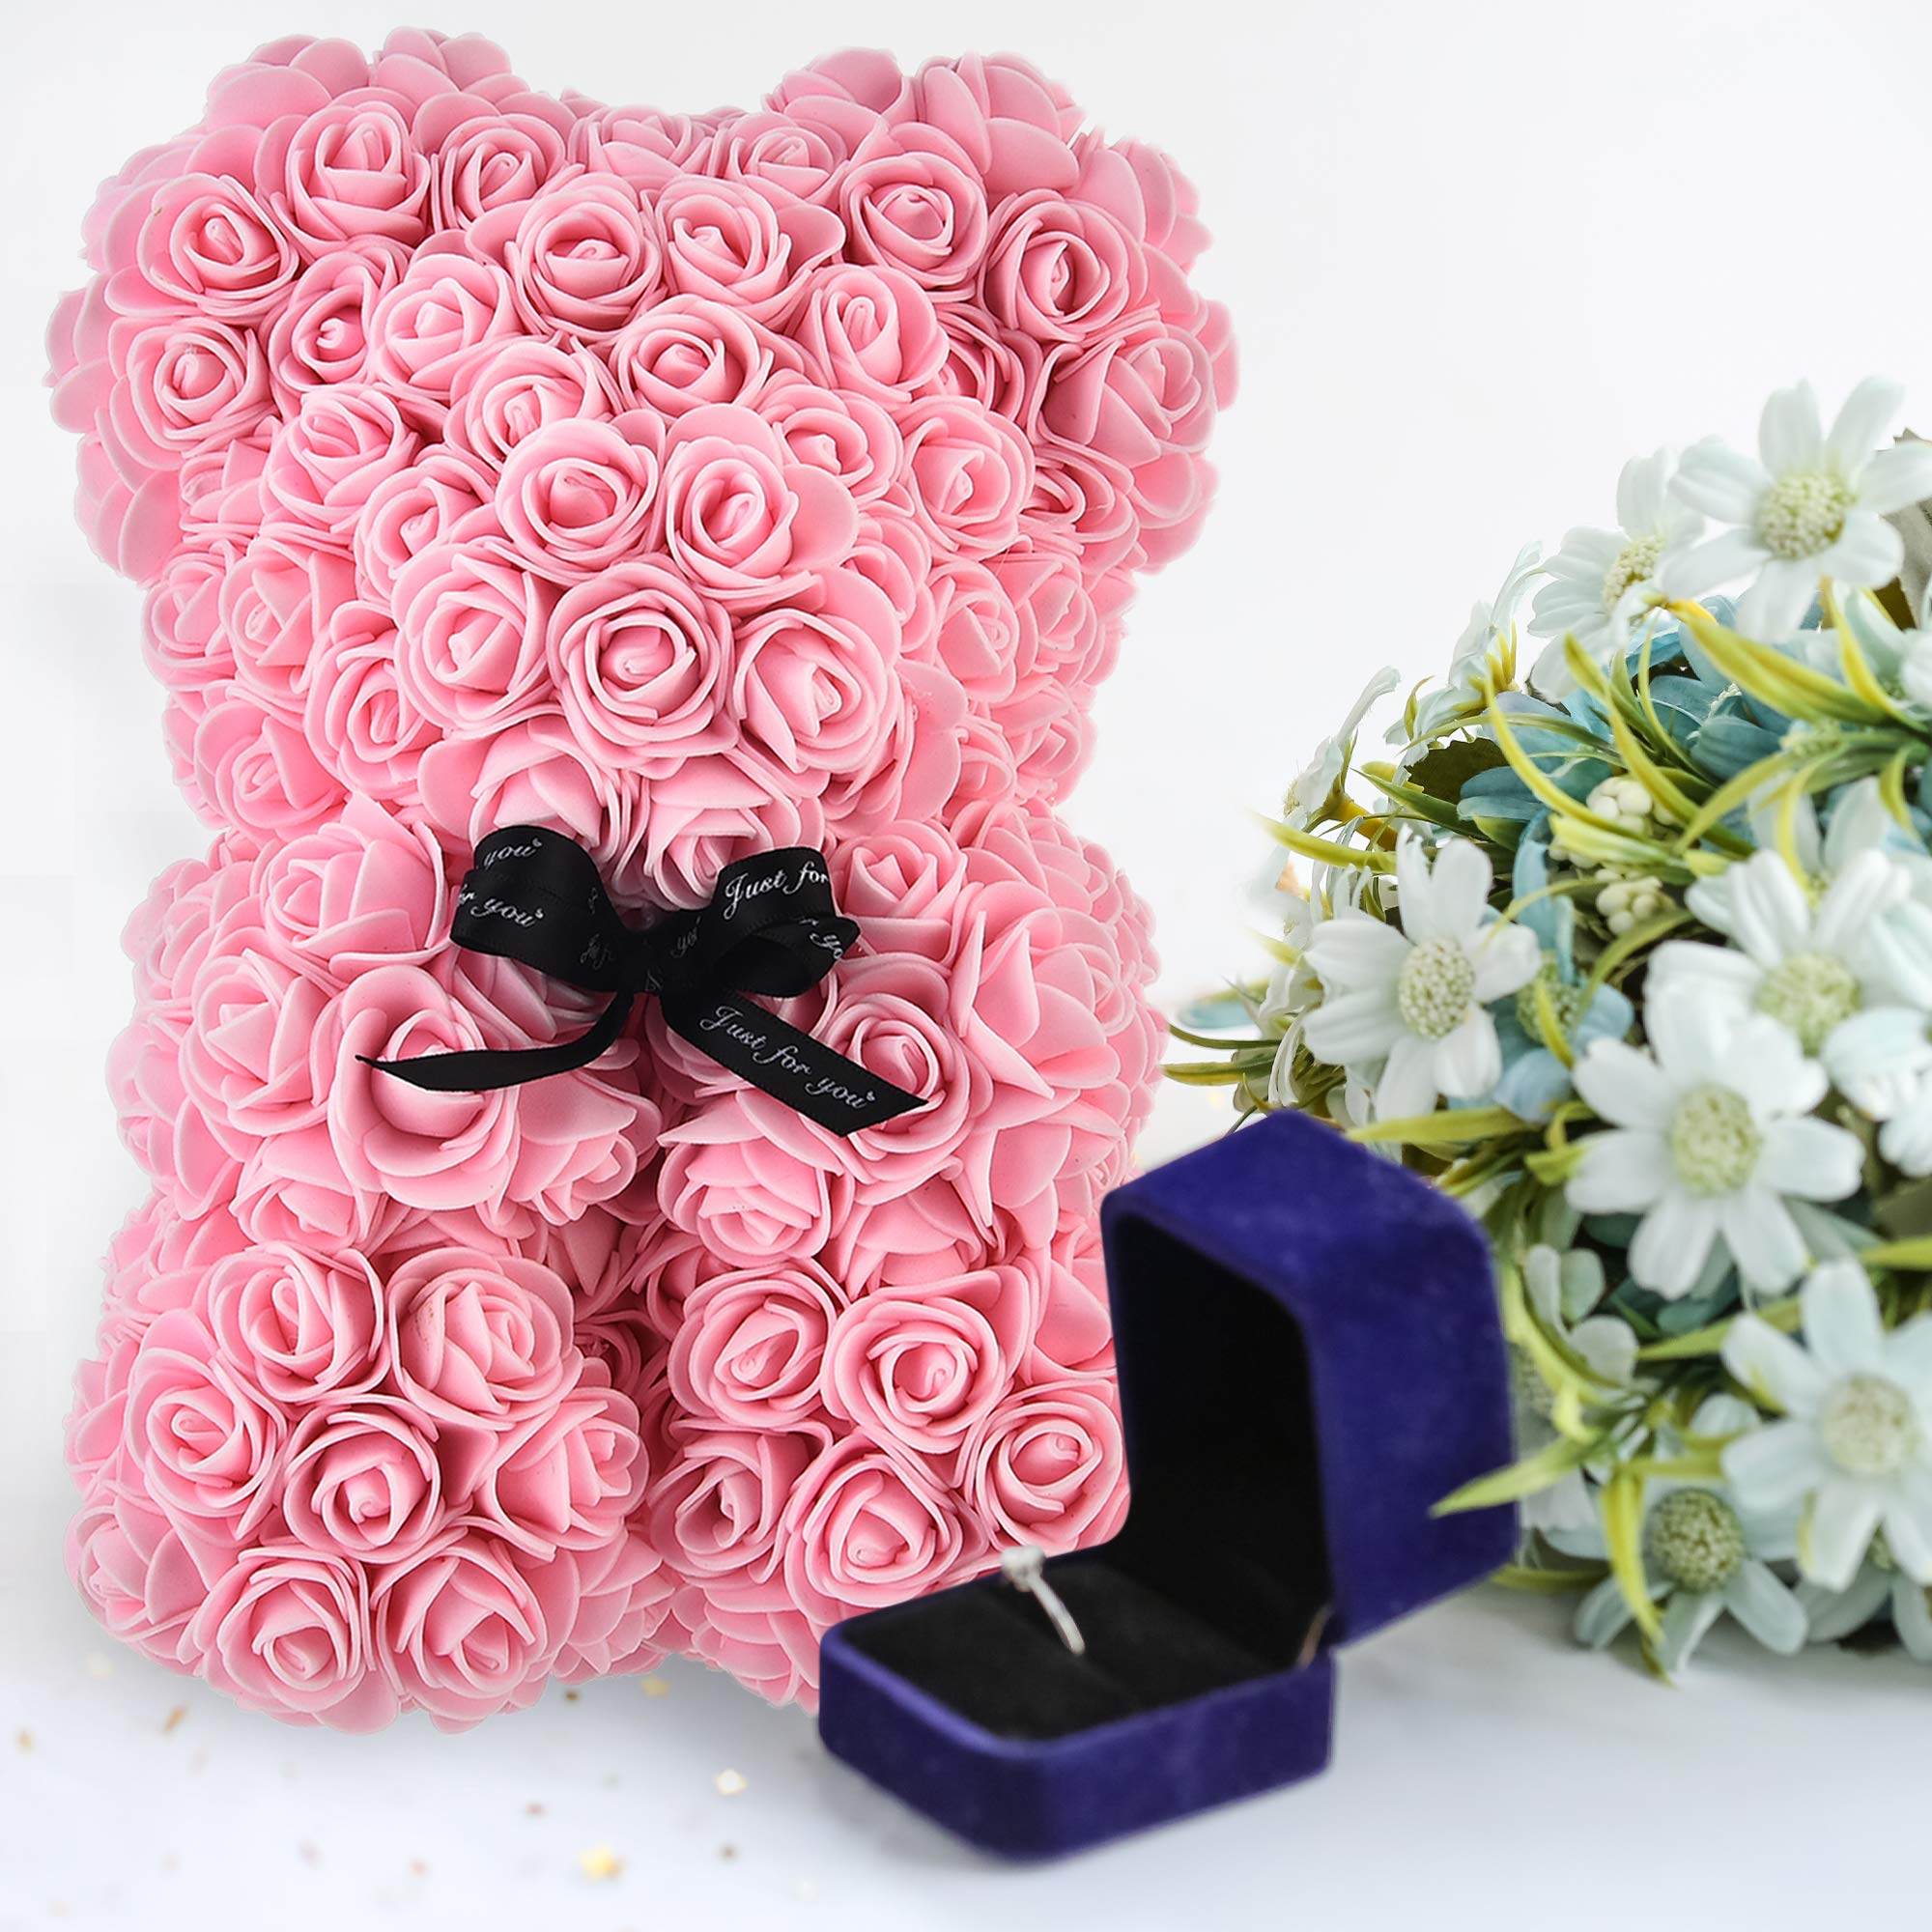 Rose Bear - Rose Teddy Bear on Every Rose Bear -Flower Bear Perfect for Anniversary's - Clear Gift Box Included! 10 Inche (Light Pink)